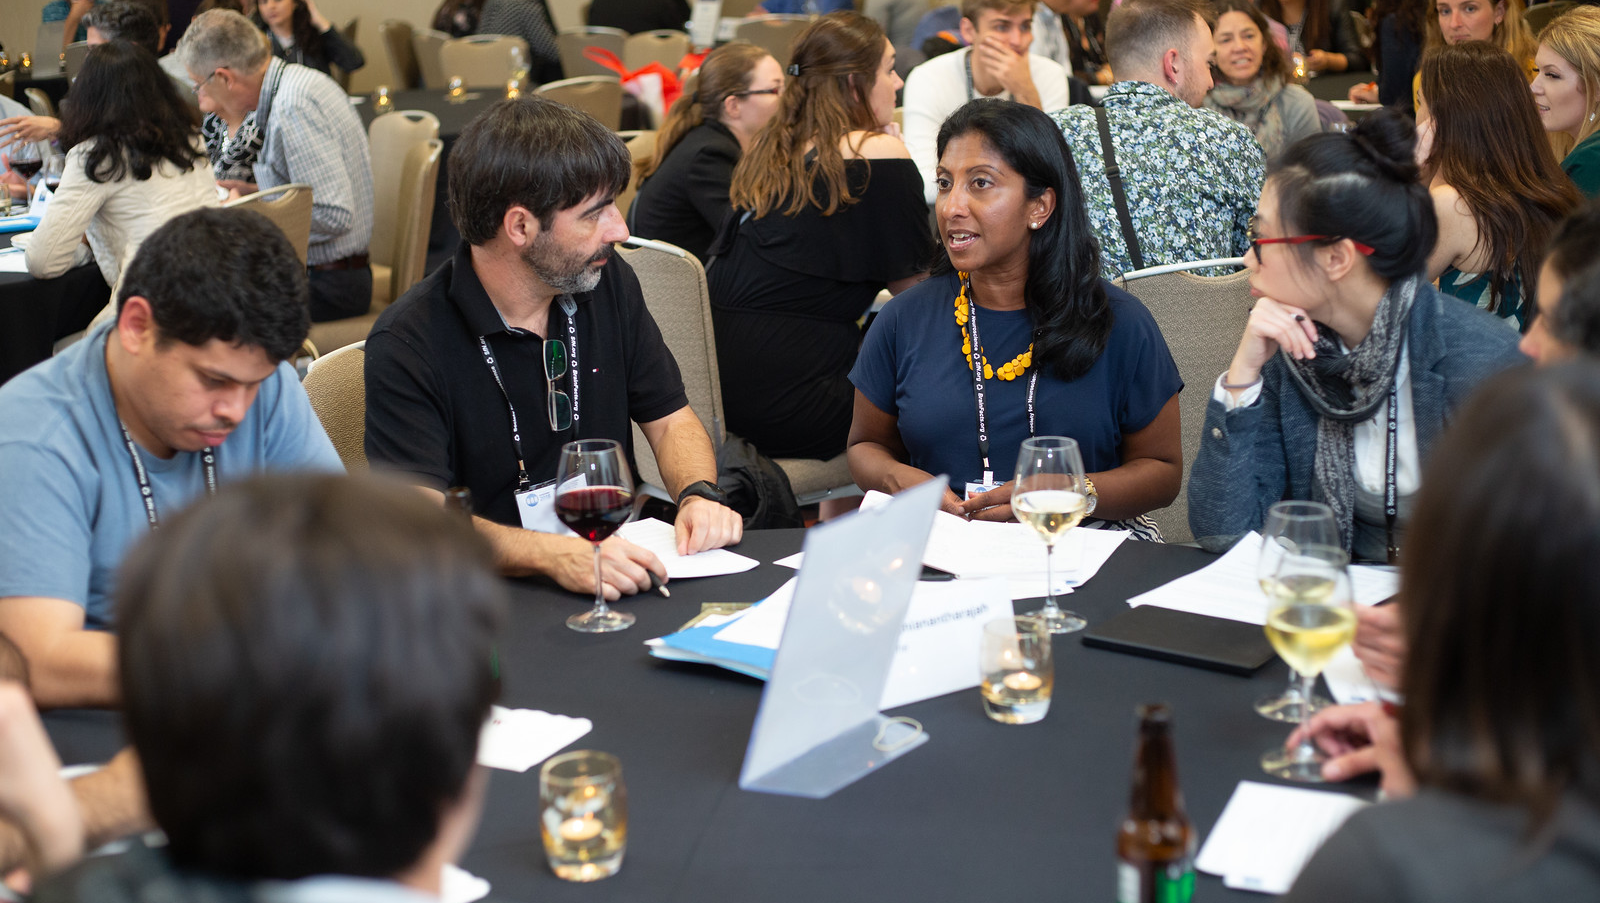 A discussion at one of the Neuroscience 2018 workshops.